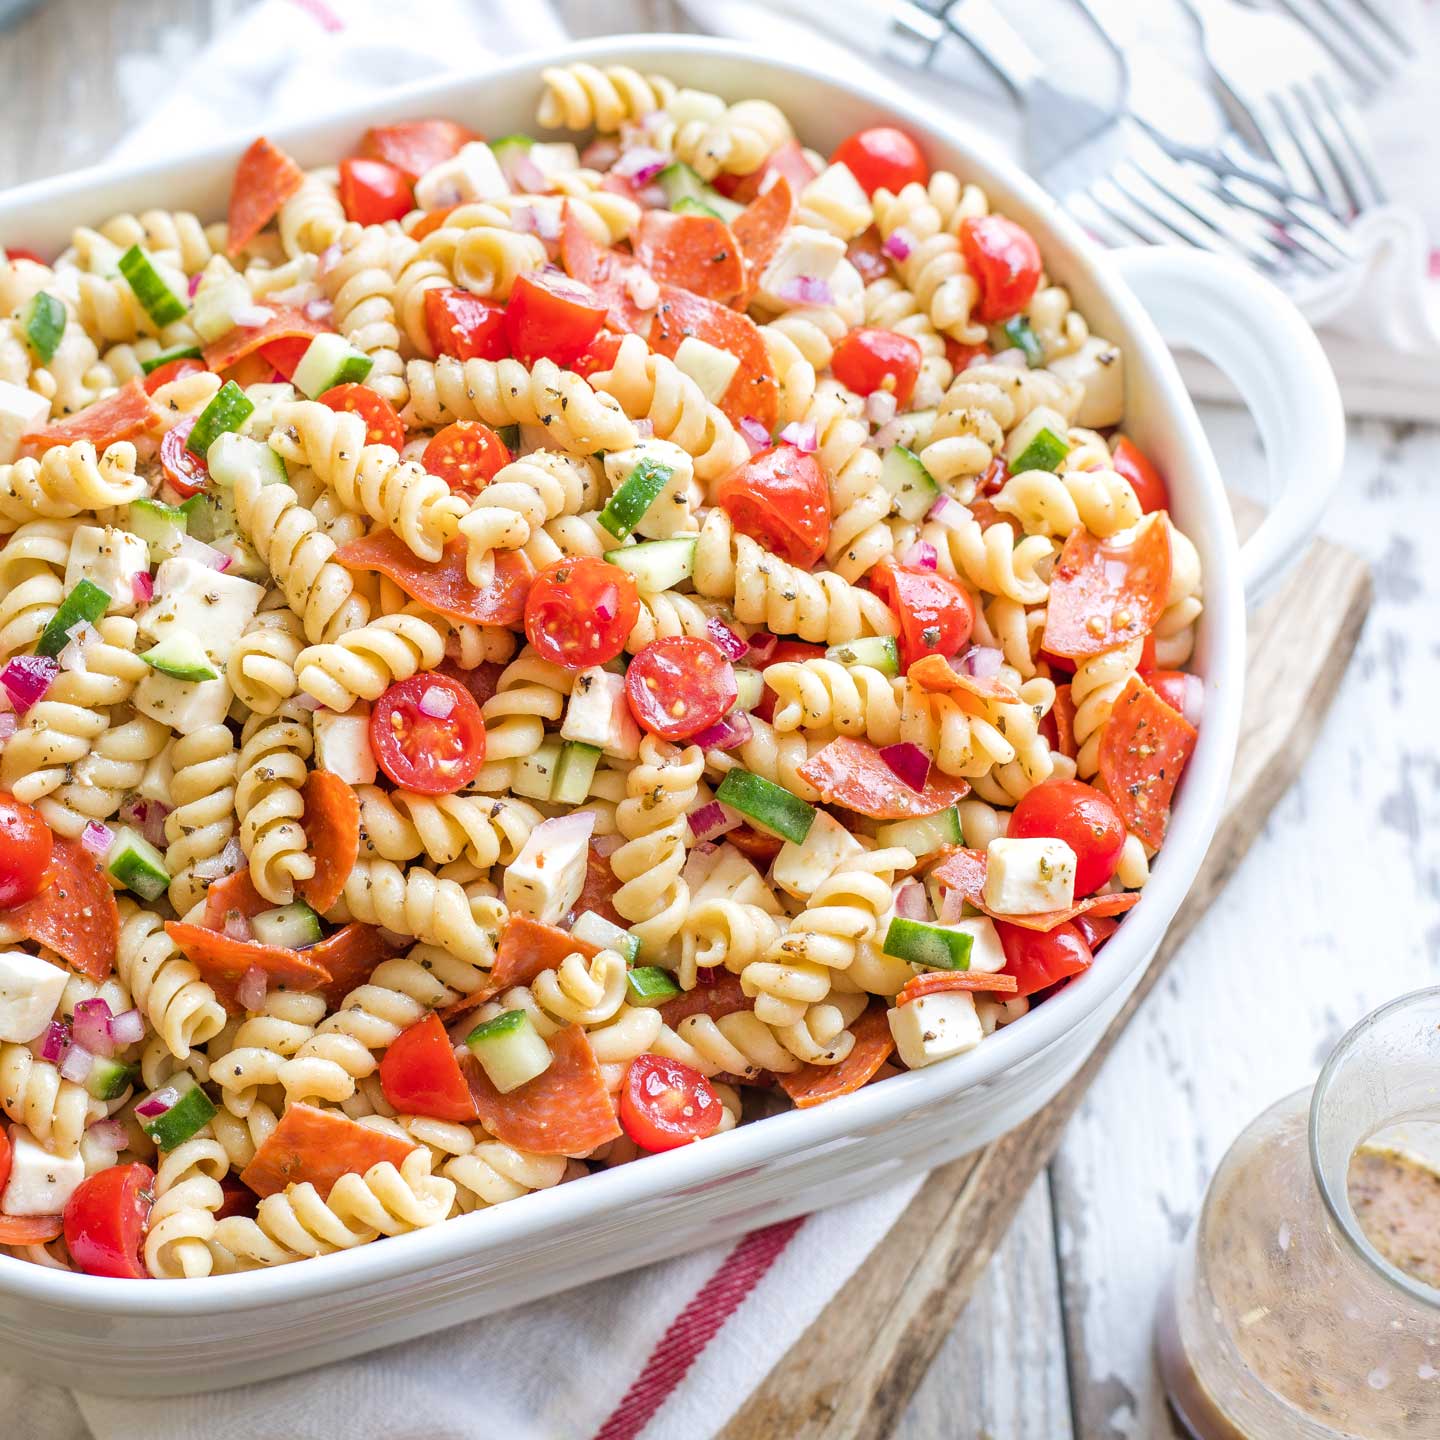 Overhead of a large oval serving dish piled with pasta salad, with a cruet of extra Italian dressing nearby.